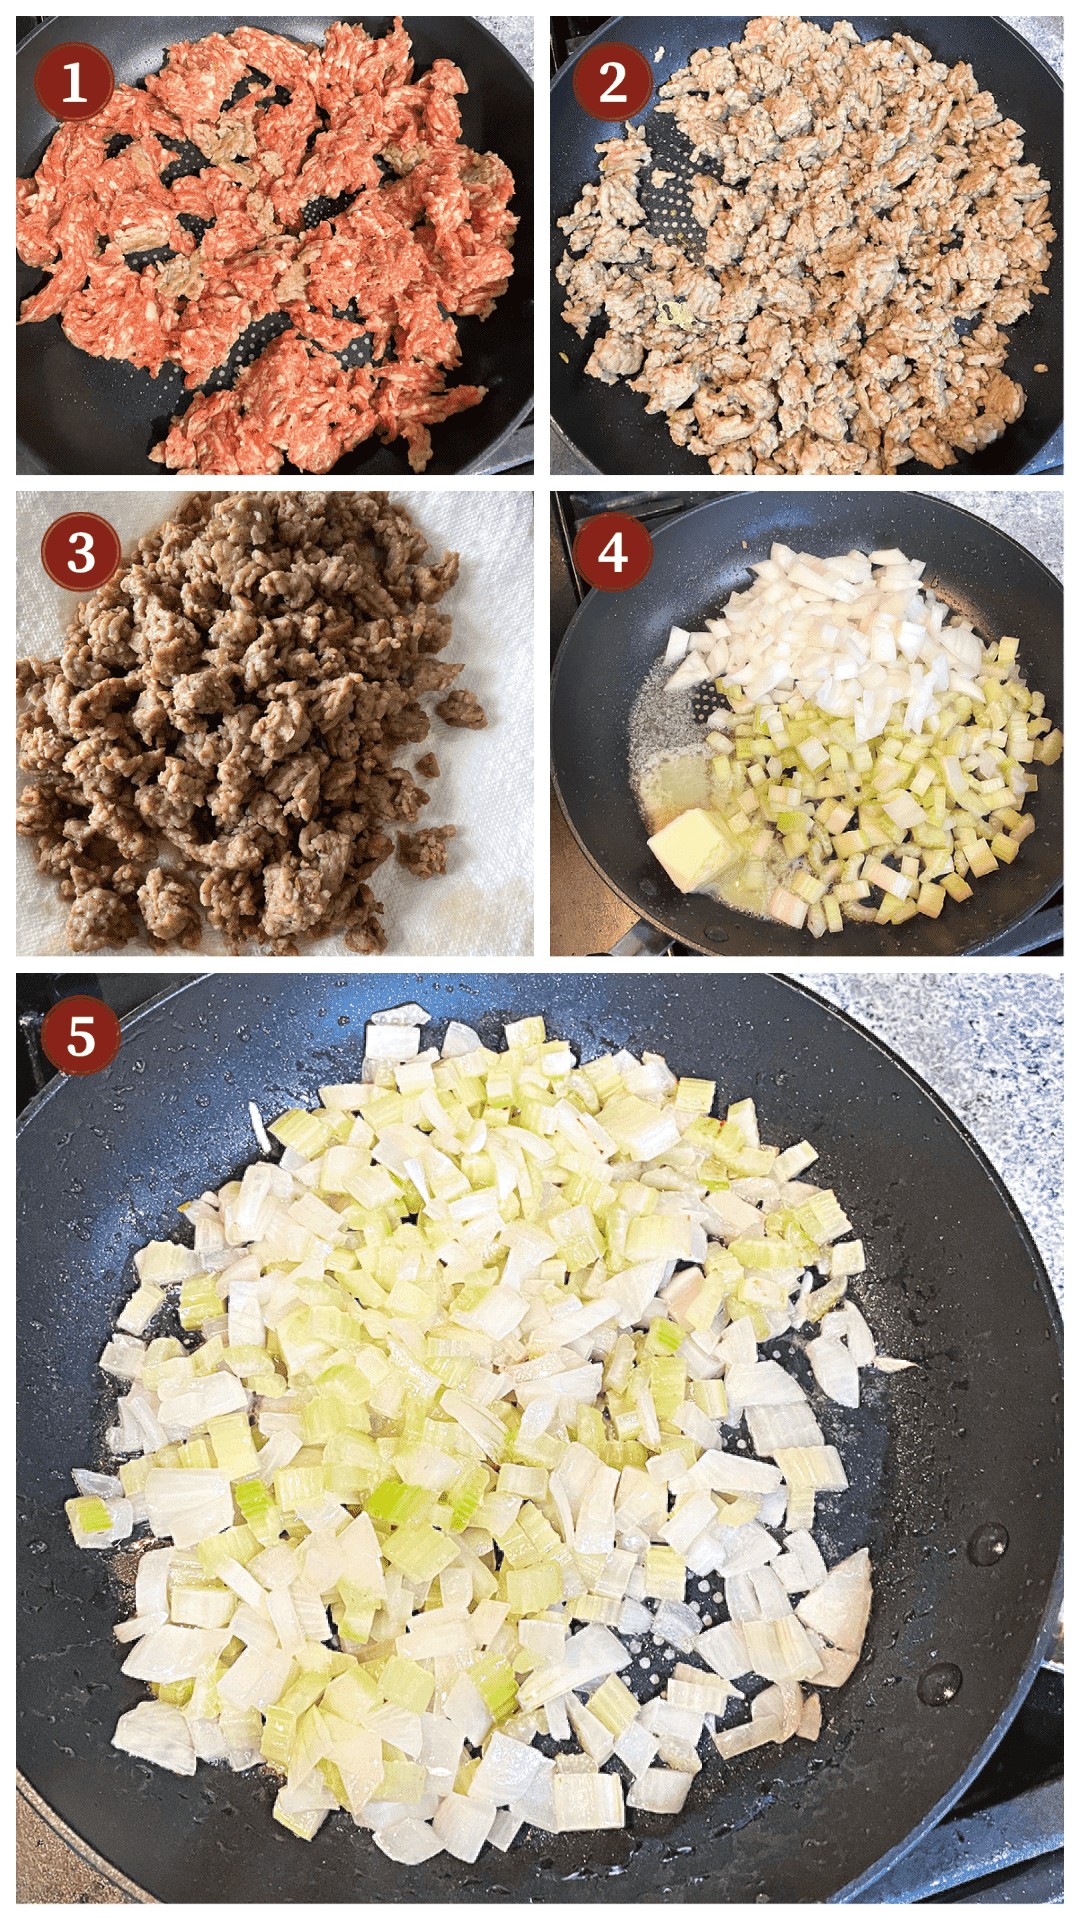 A collage of images showing how to make homemade stuffing, steps 1 - 5.